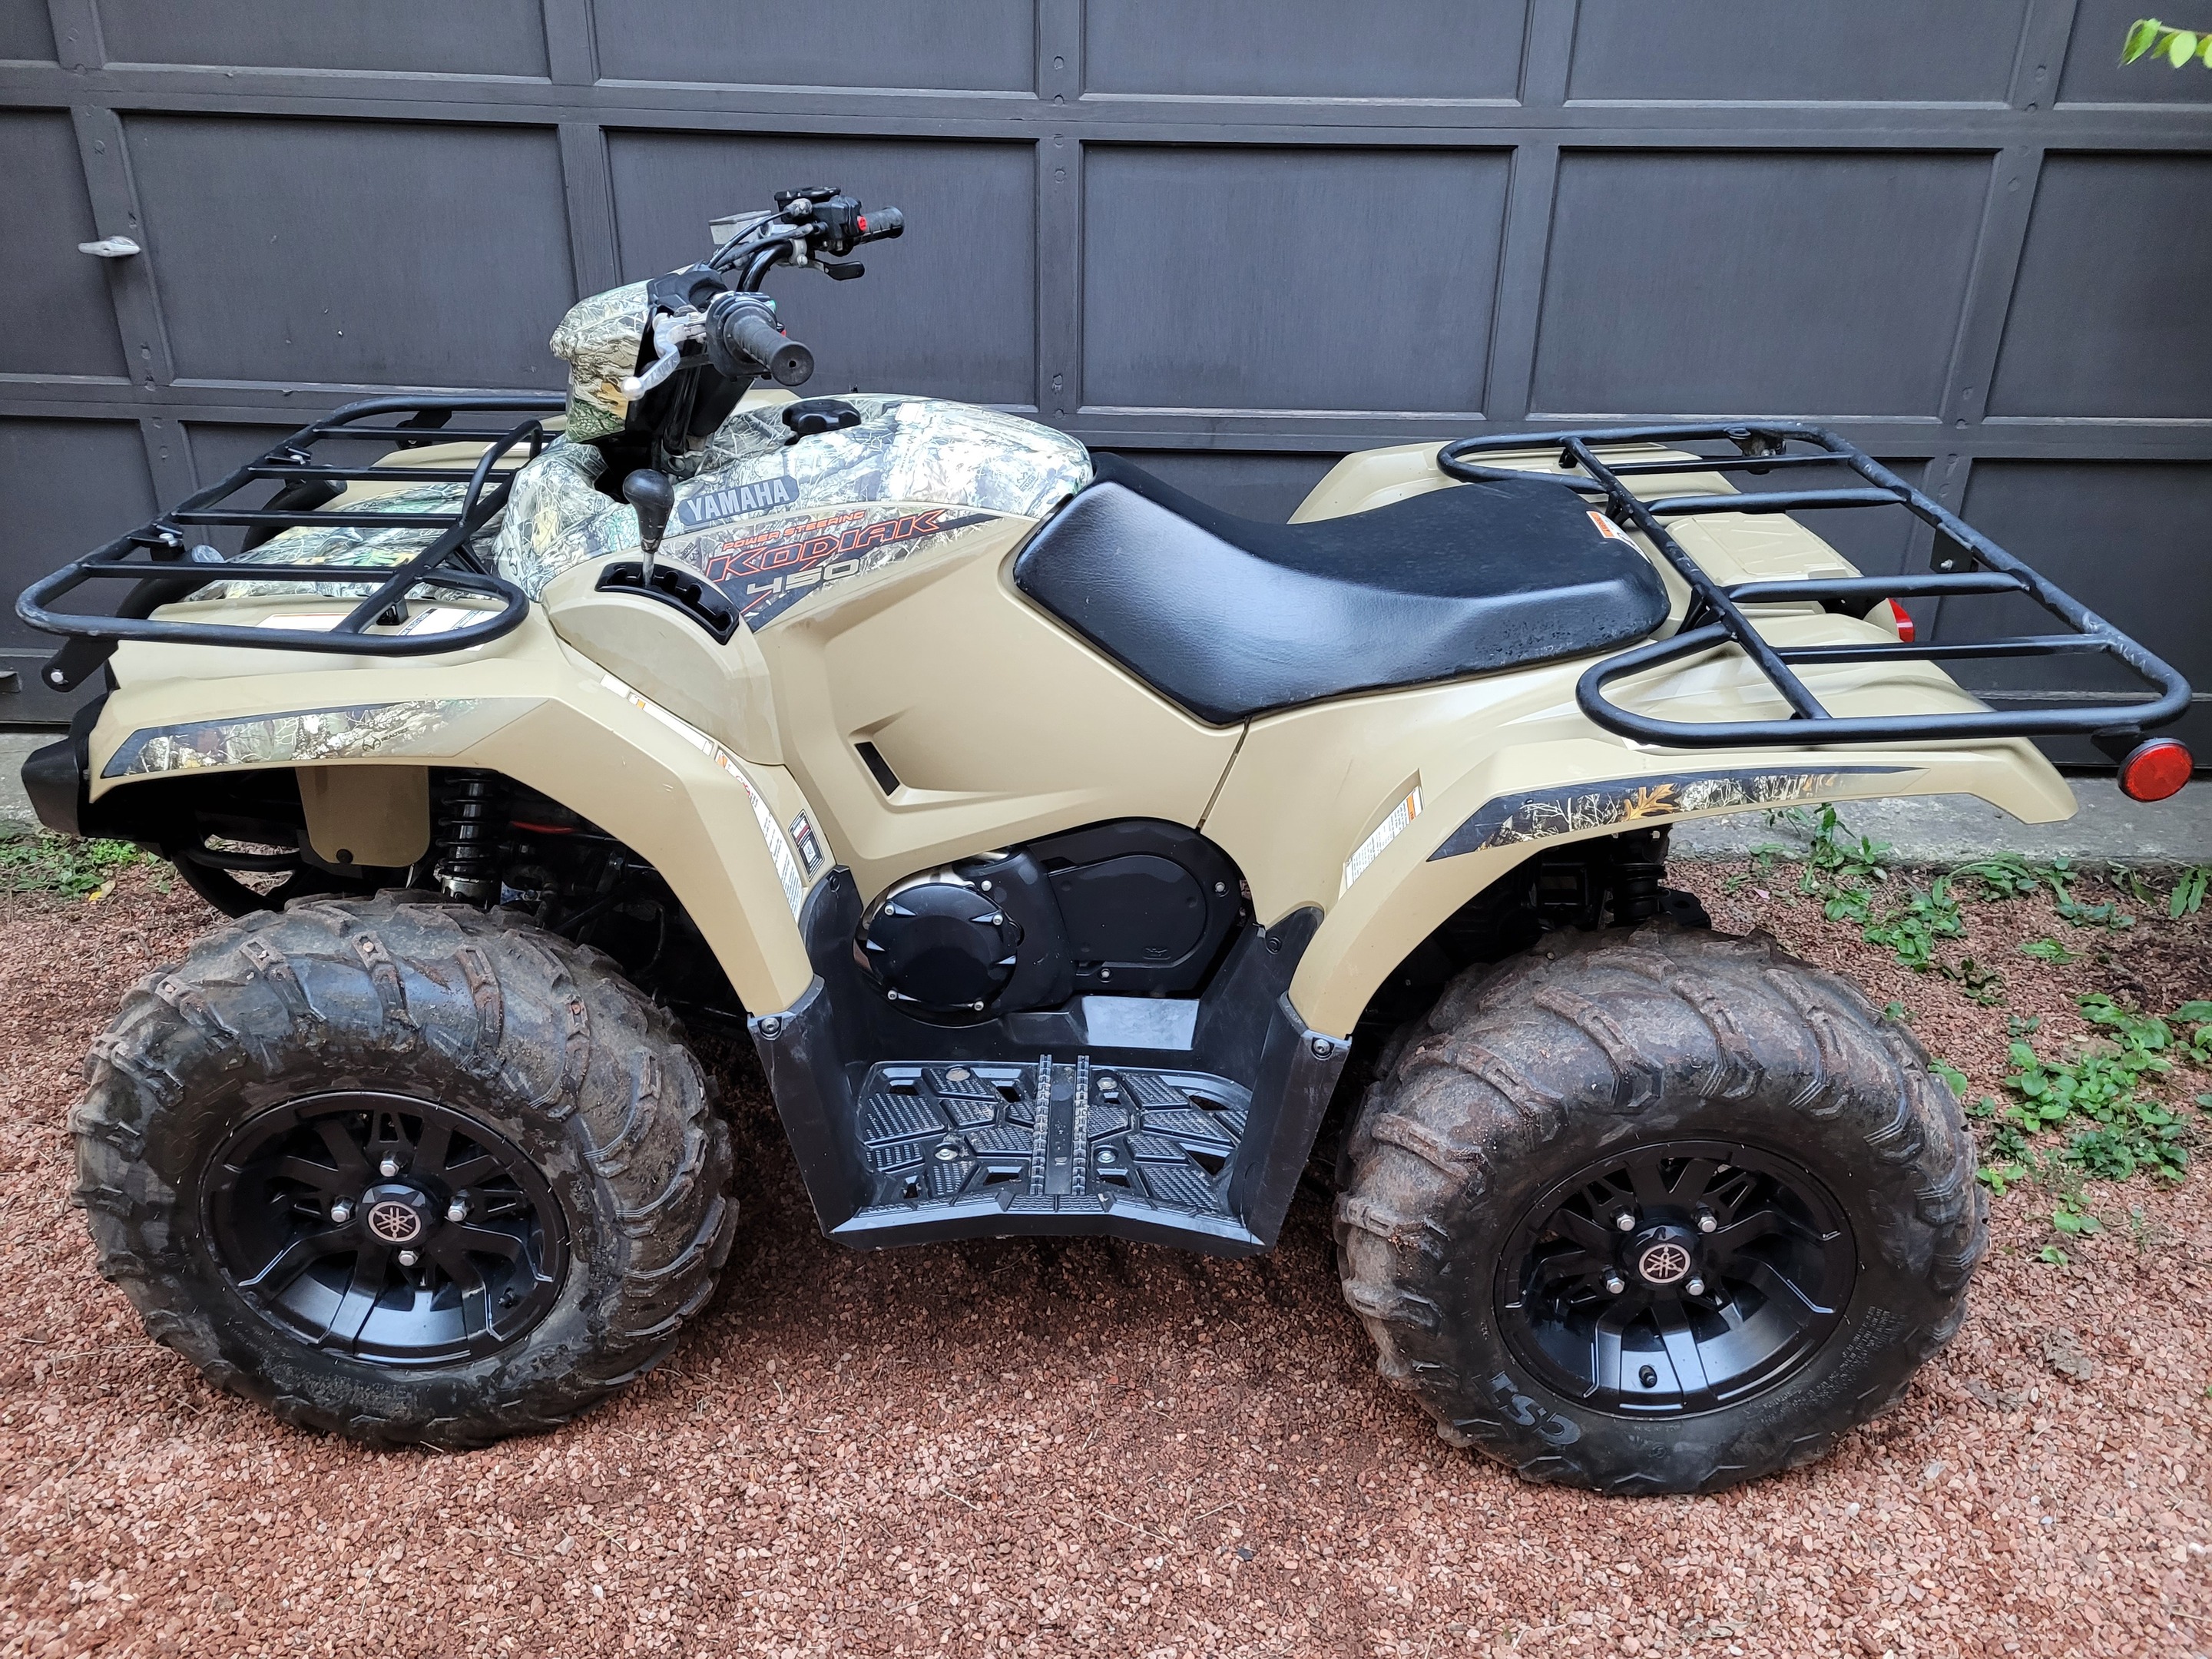 2023 Yamaha Kodiak 450 EPS 1-Owner, Financing Available, Trade-ins Welcome!